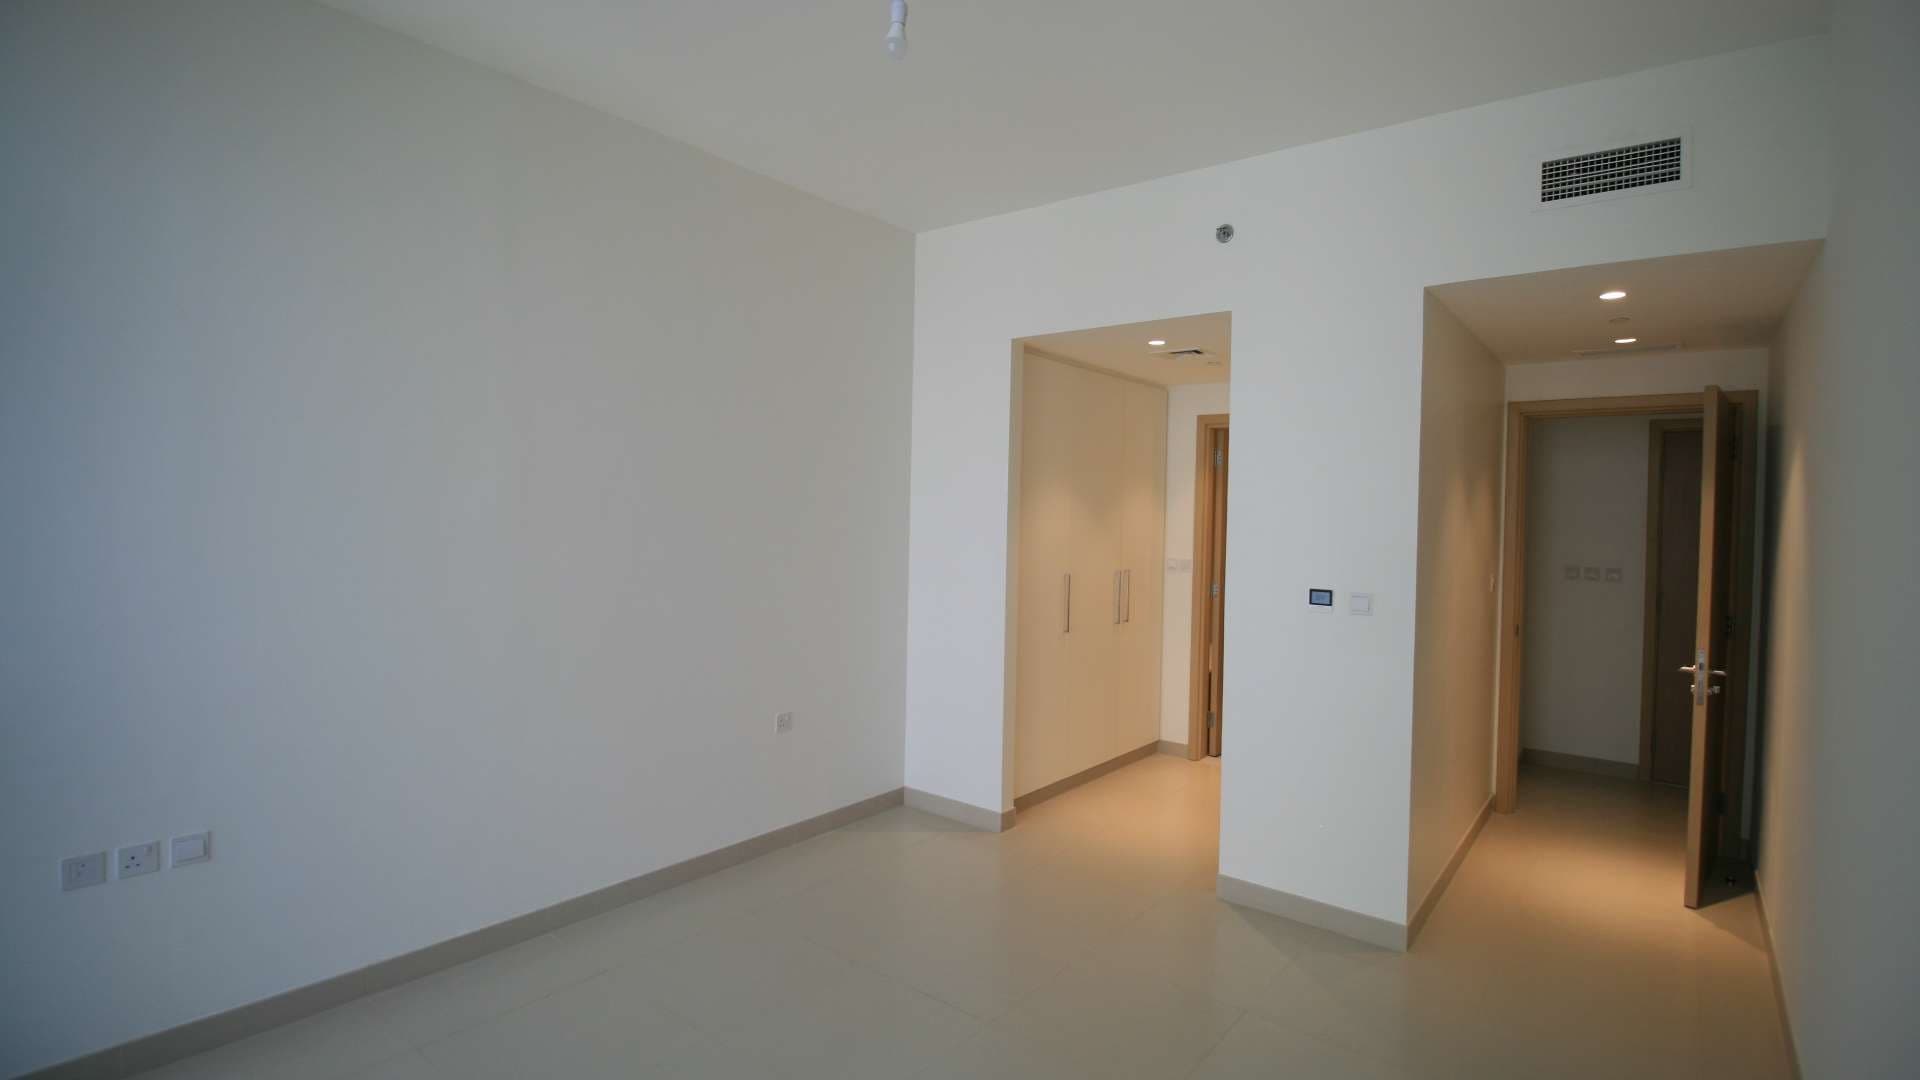 2 Bedroom Apartment For Sale Acacia Park Heights Lp09391 2818a2ff497cb400.jpg